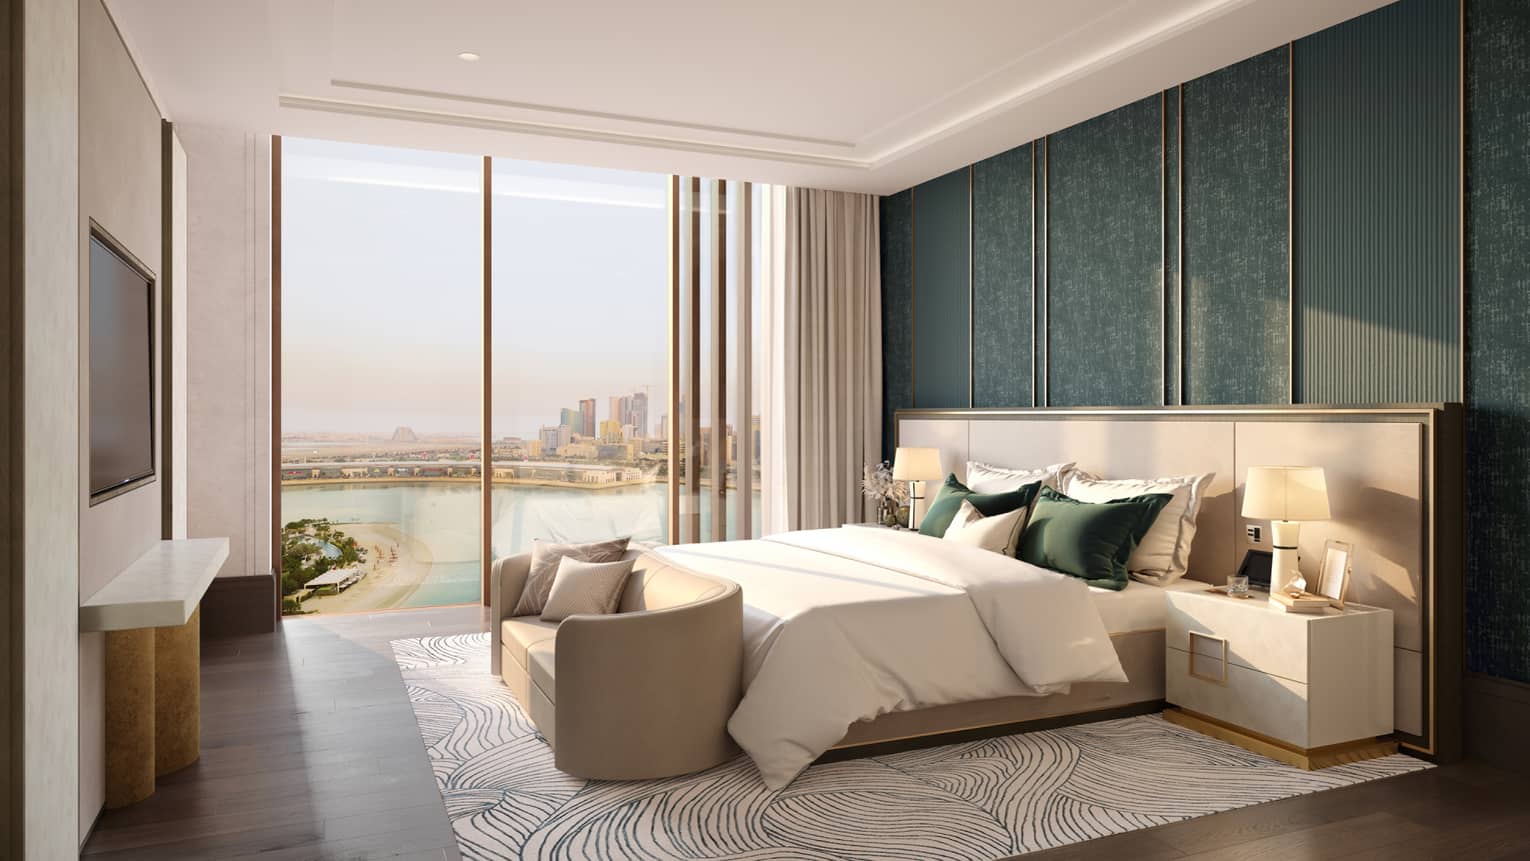 Rendering of residence bedroom with floor-to-ceiling window and skyline view